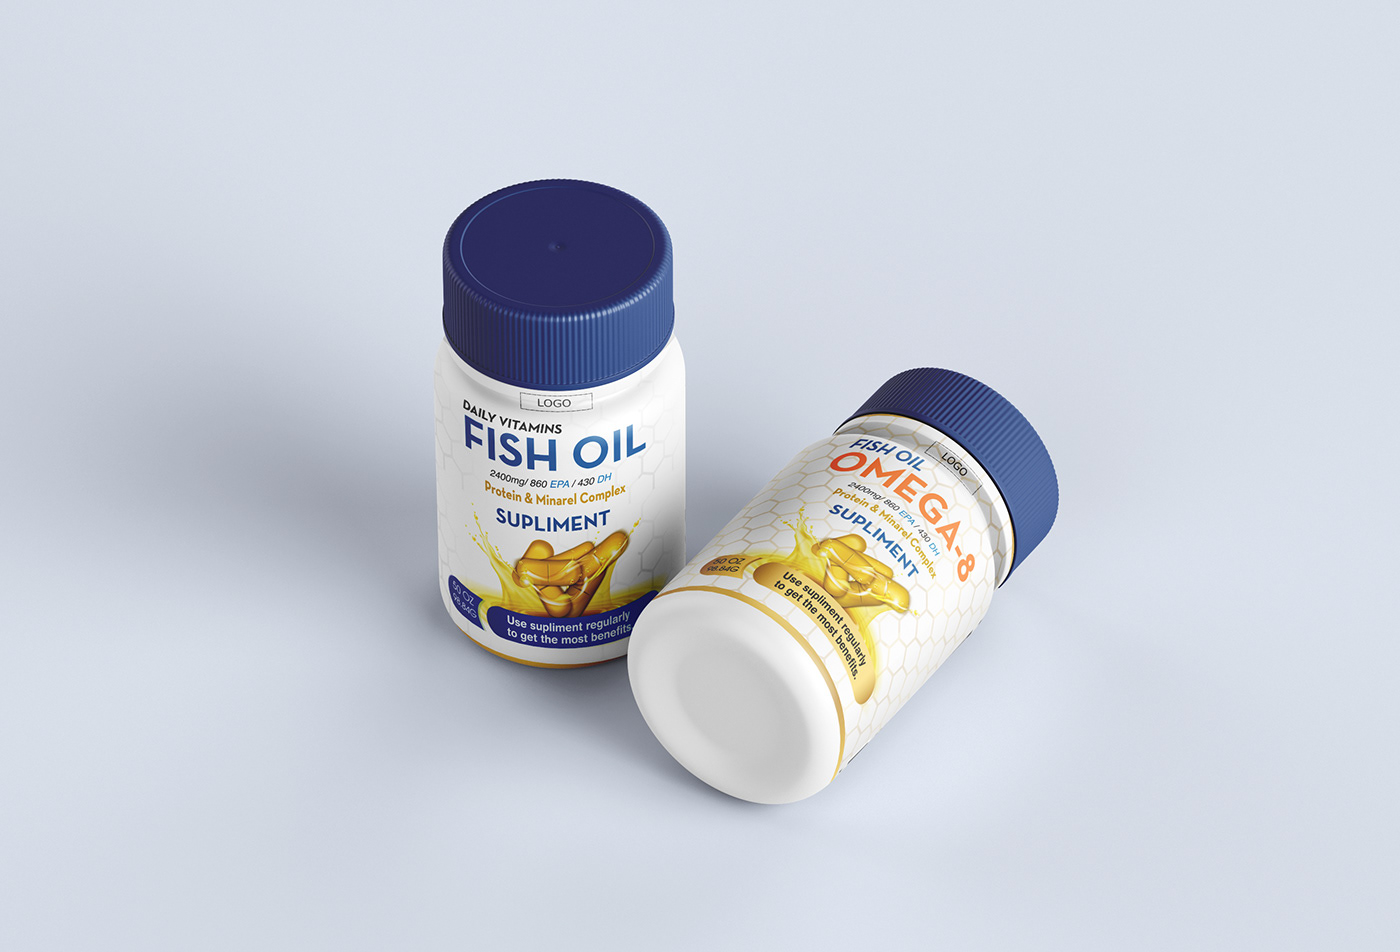 label design brand identity Advertising  multivitamin packaging design product Packaging label and package design